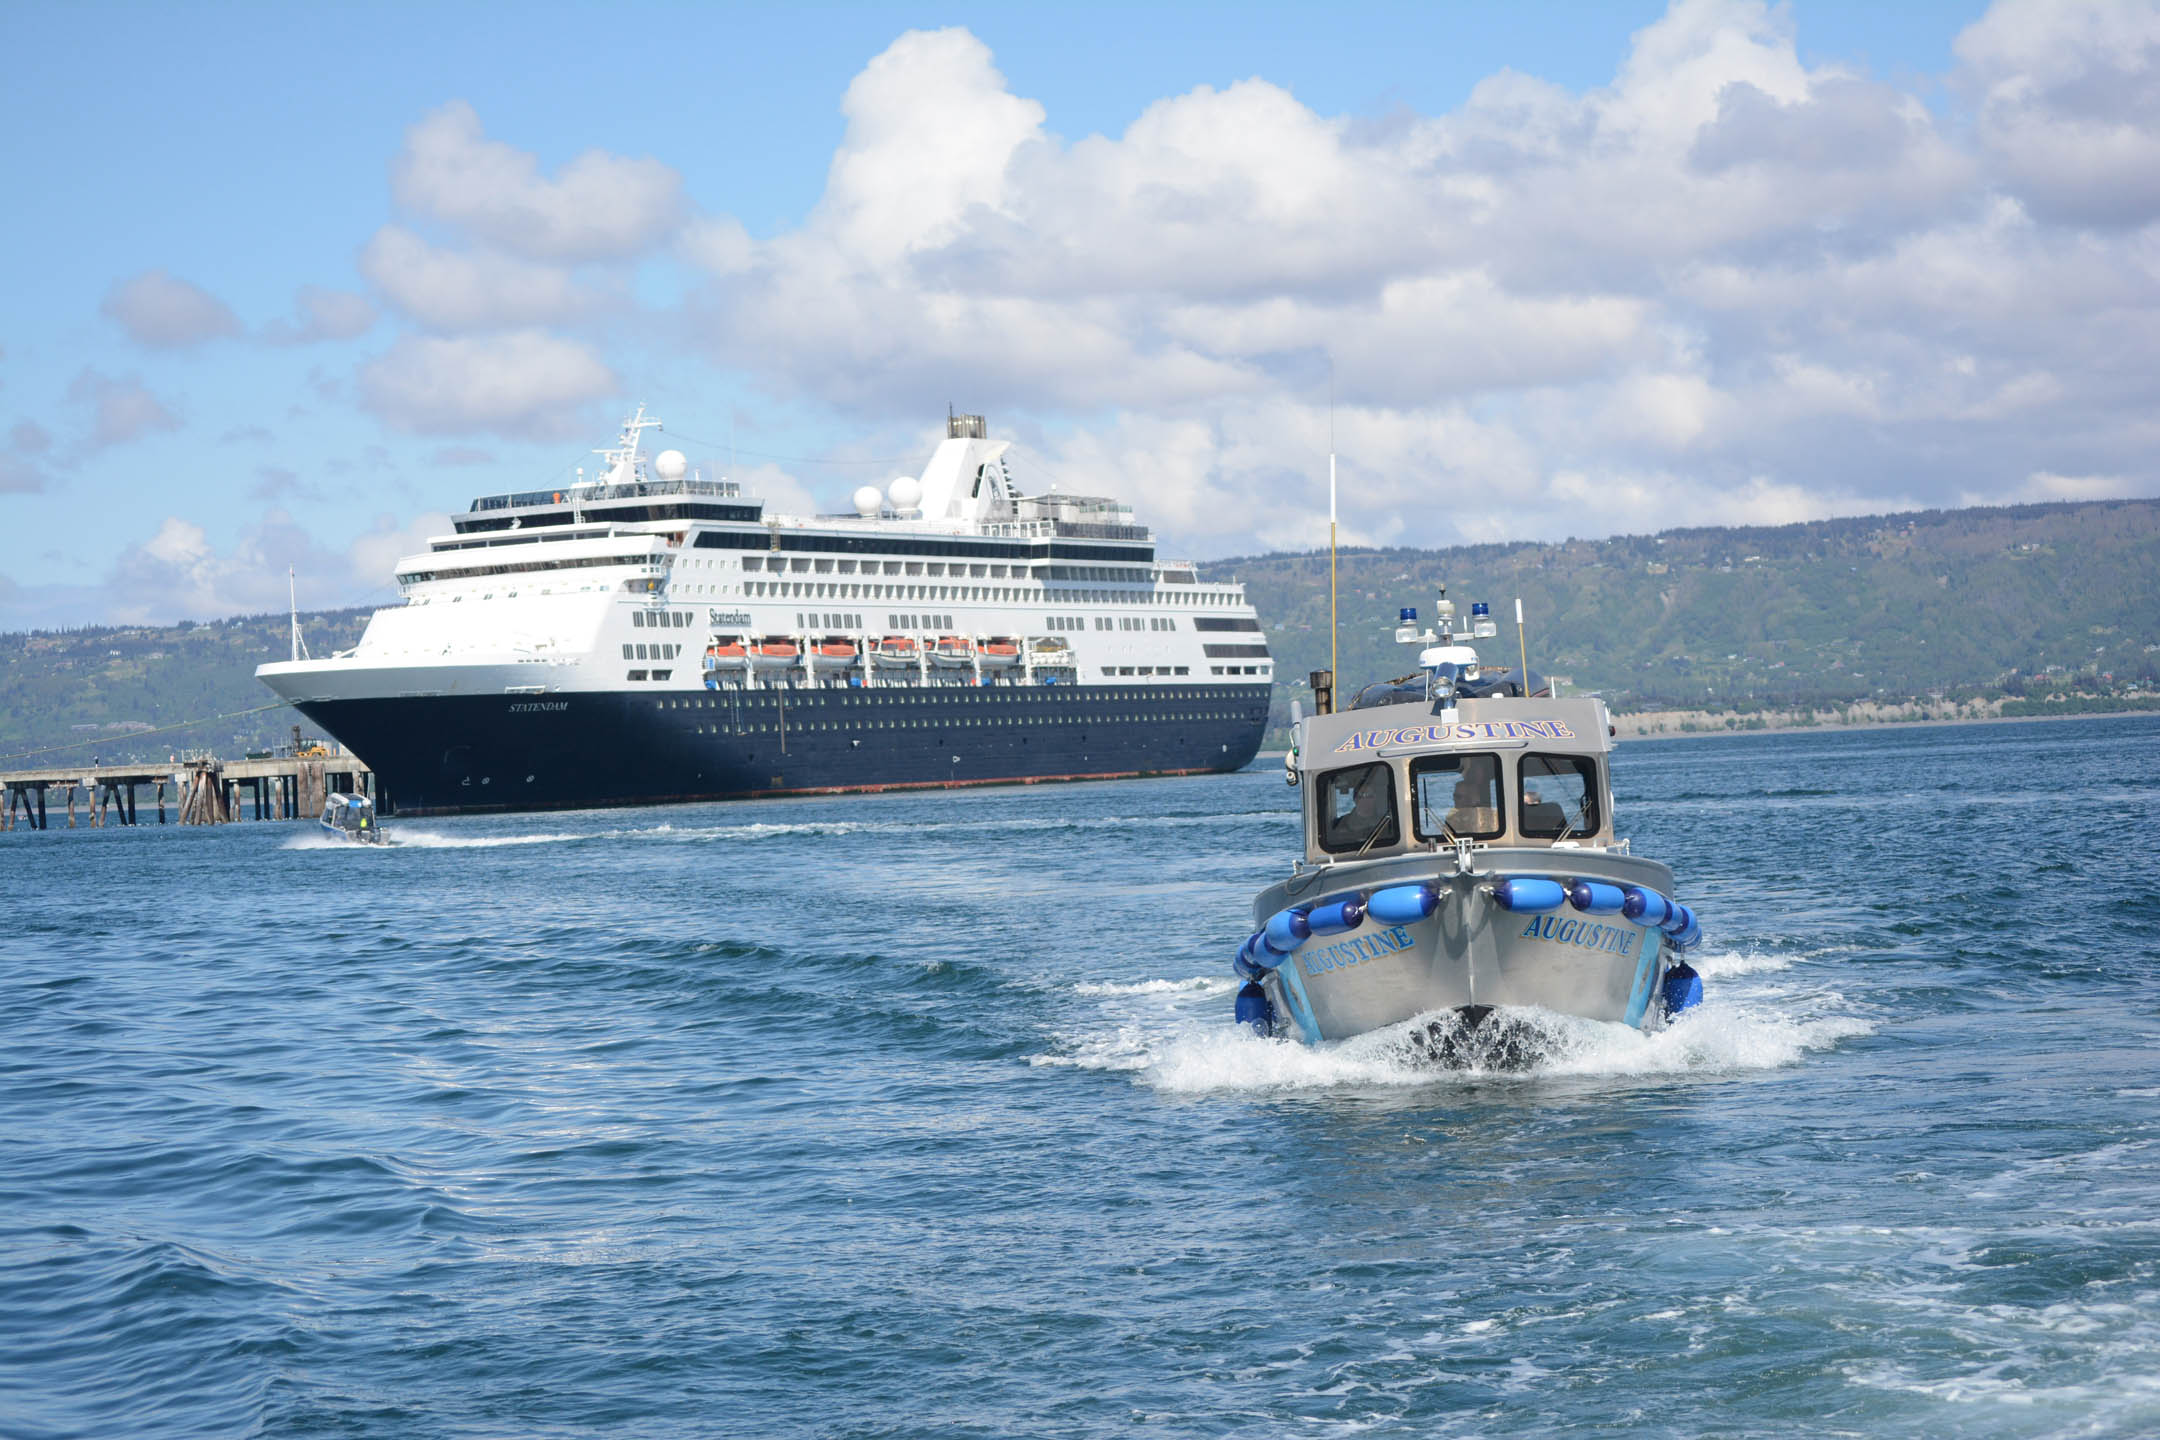 The P/V Augustine passes by the M/V Statendam as the Alaska Public Safety boat leaves the Homer Harbor on Tuesday. Troopers provided security for King Harald V on his visit to Homer.-Photo by Michael Armstrong; Homer News